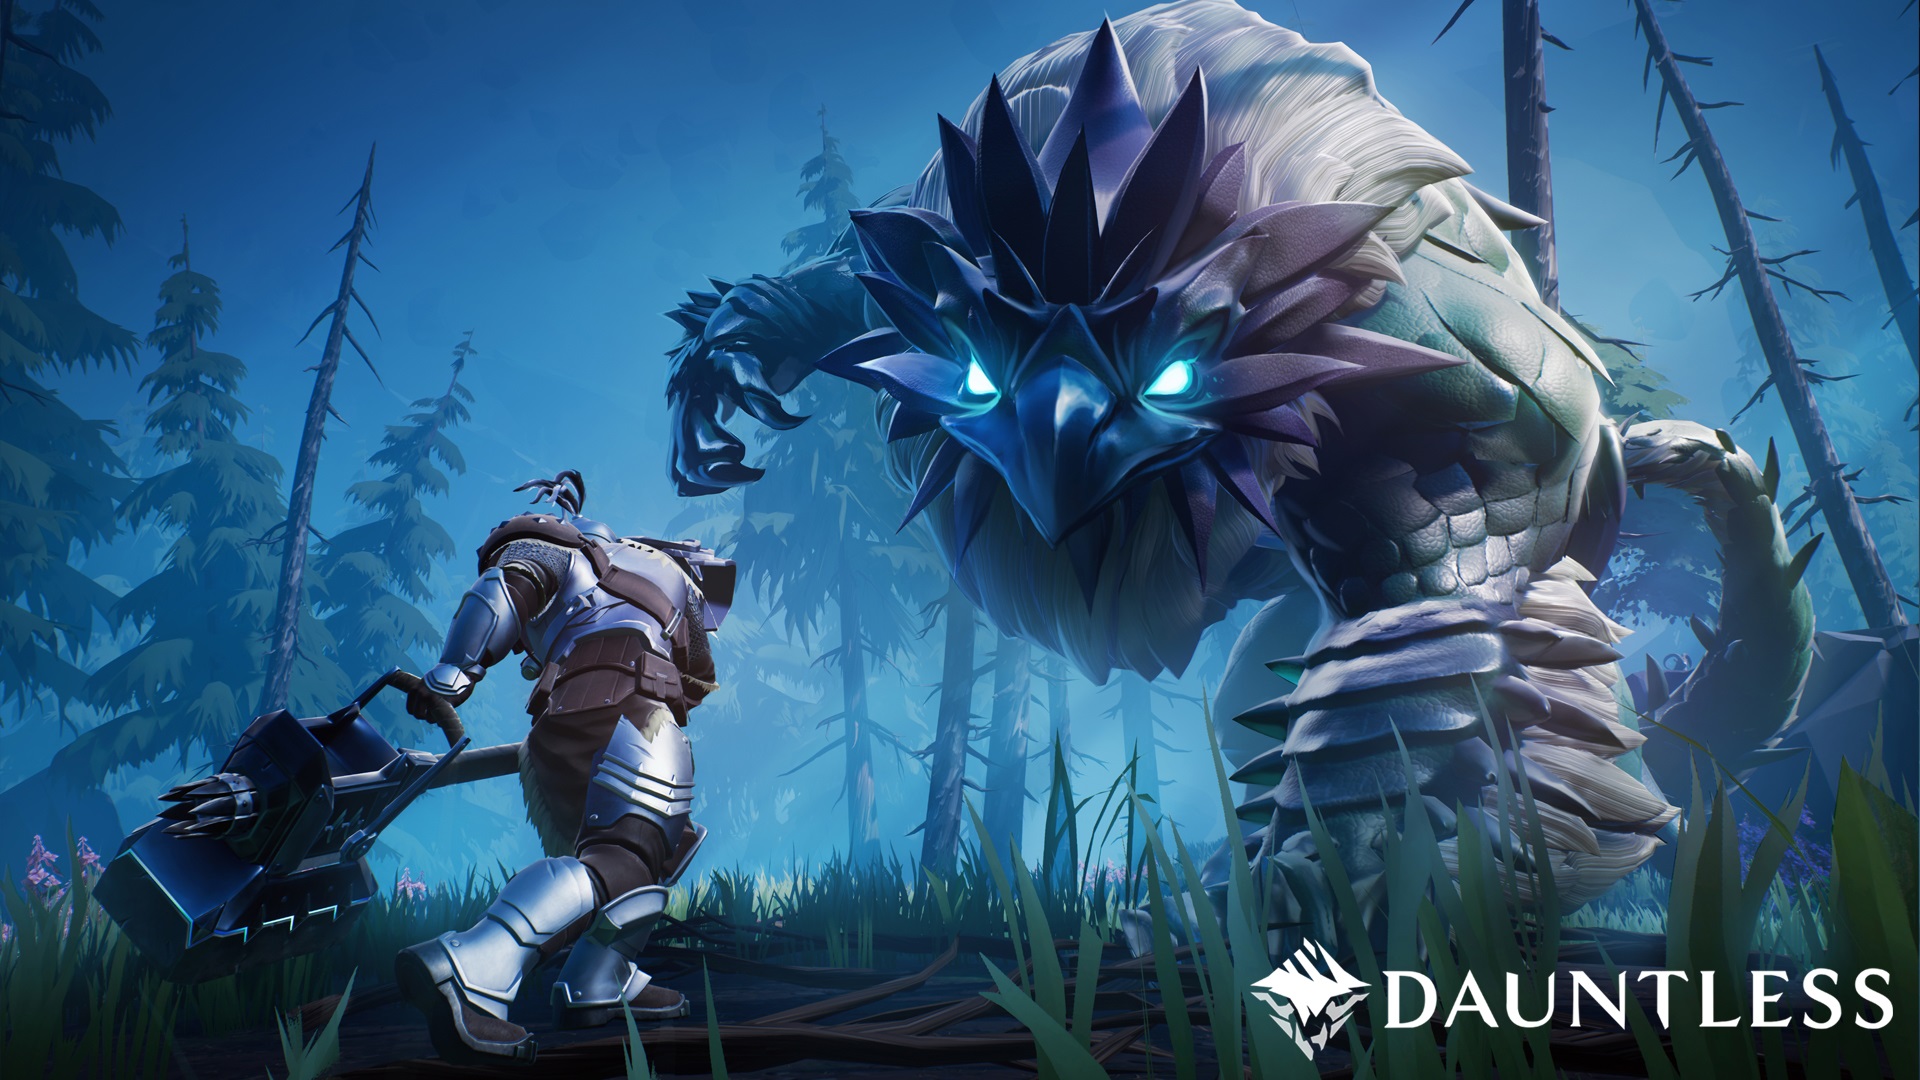 Dauntless Roadmap Lays Out Future Content Additions